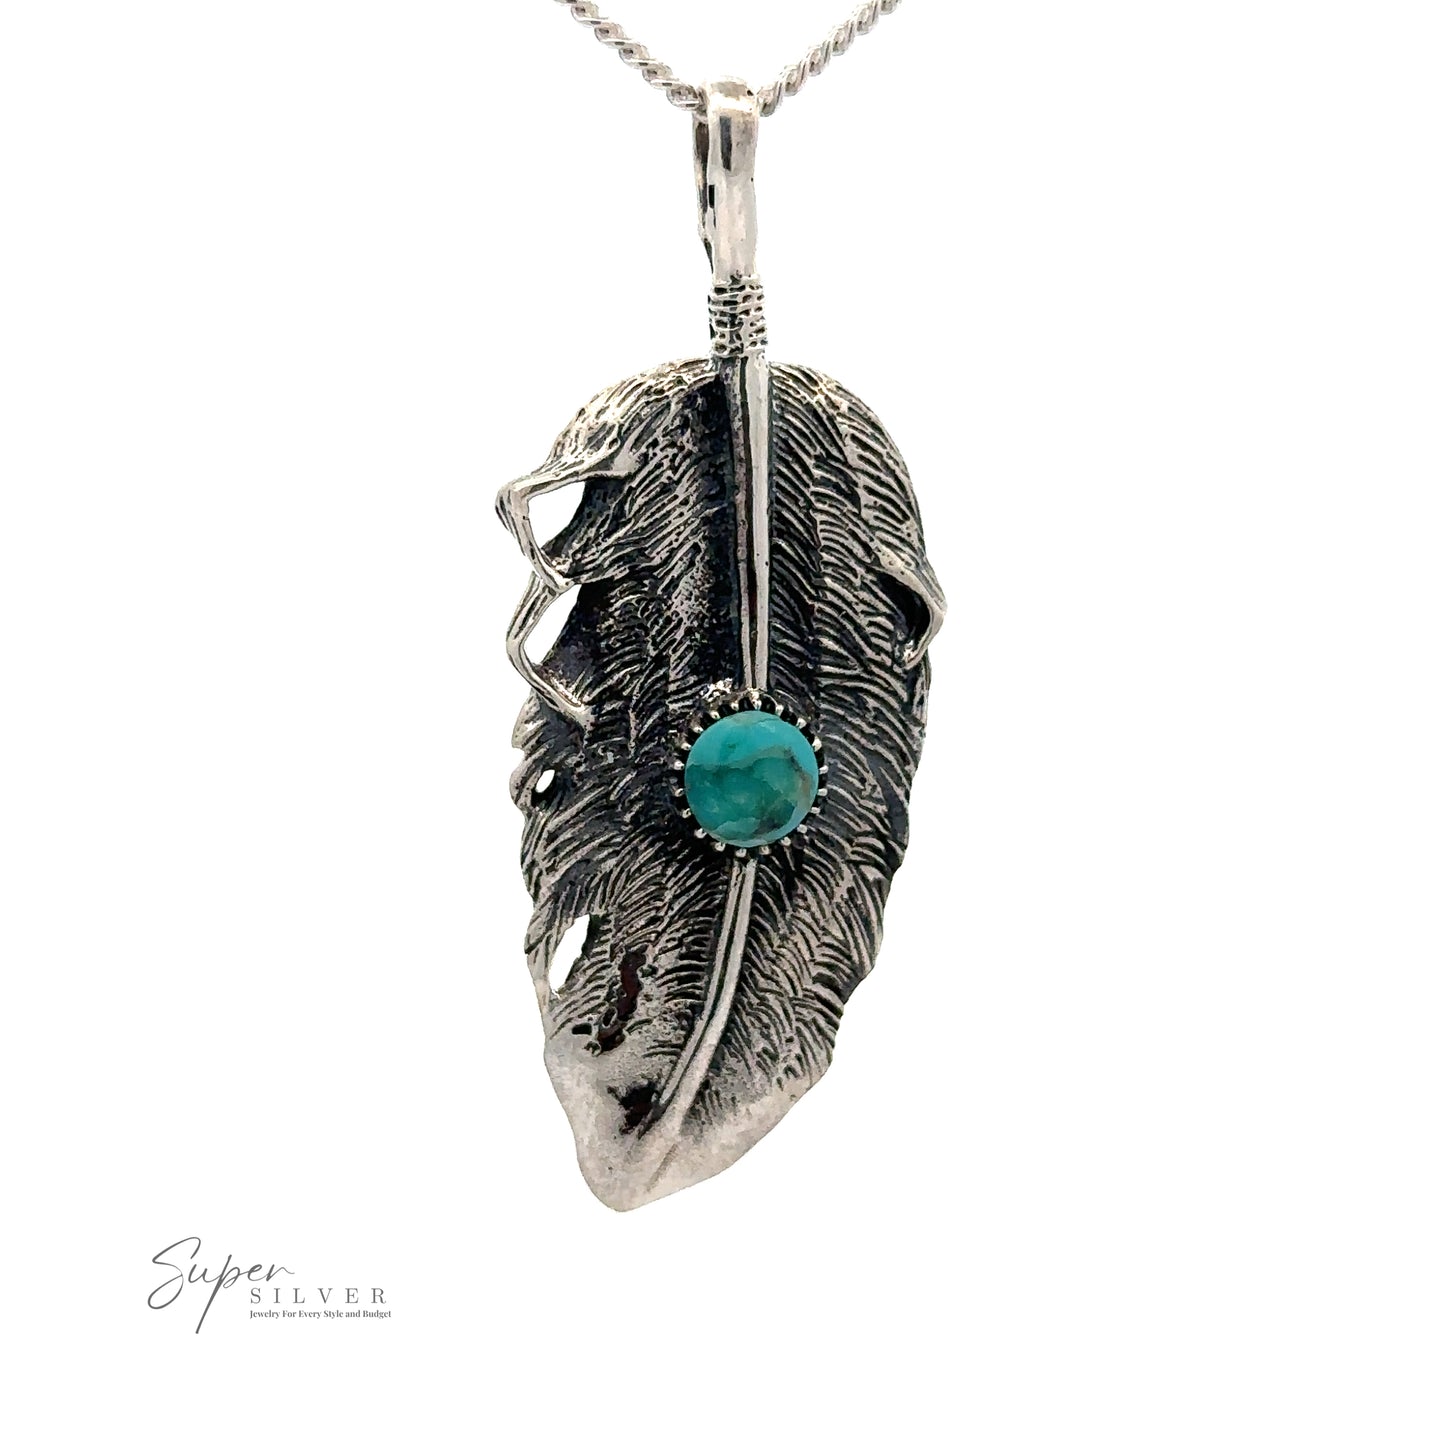 A Native Inspired Feather Pendant With Turquoise is displayed against a white background. The logo "Super Silver" is visible in the bottom left corner.